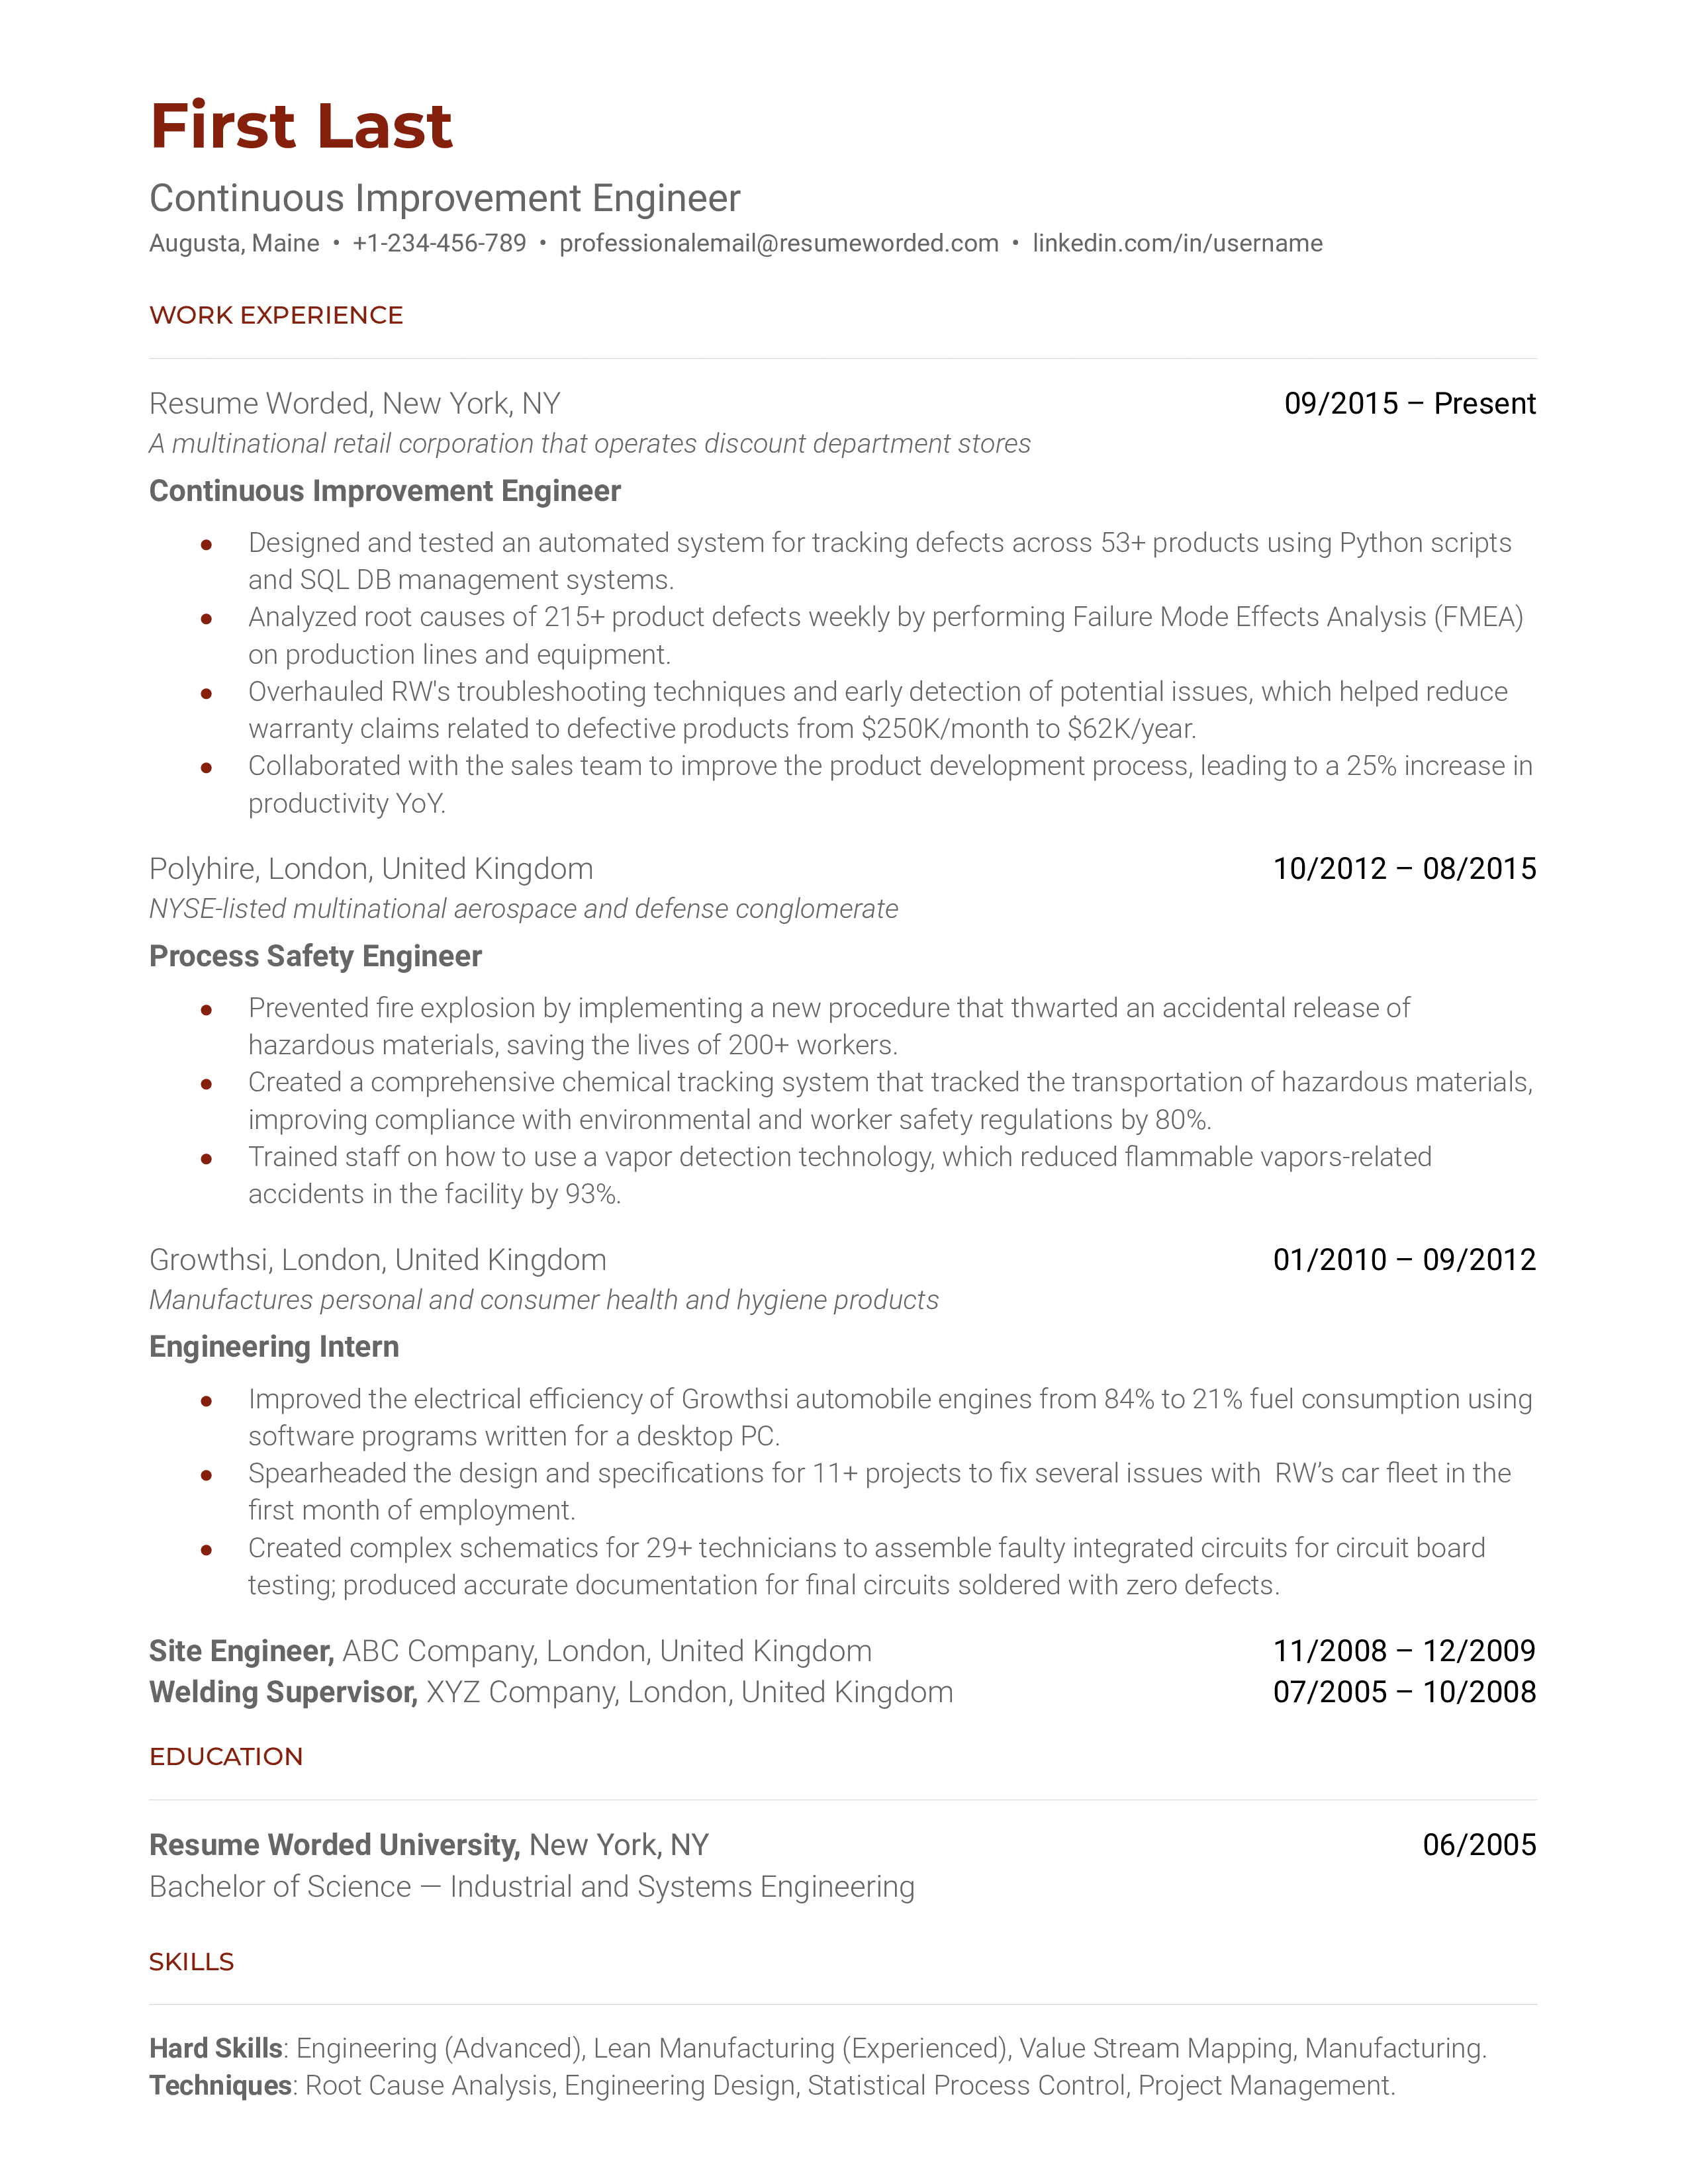 A CV of a Continuous Improvement Engineer showcasing technical skills and methodologies used.